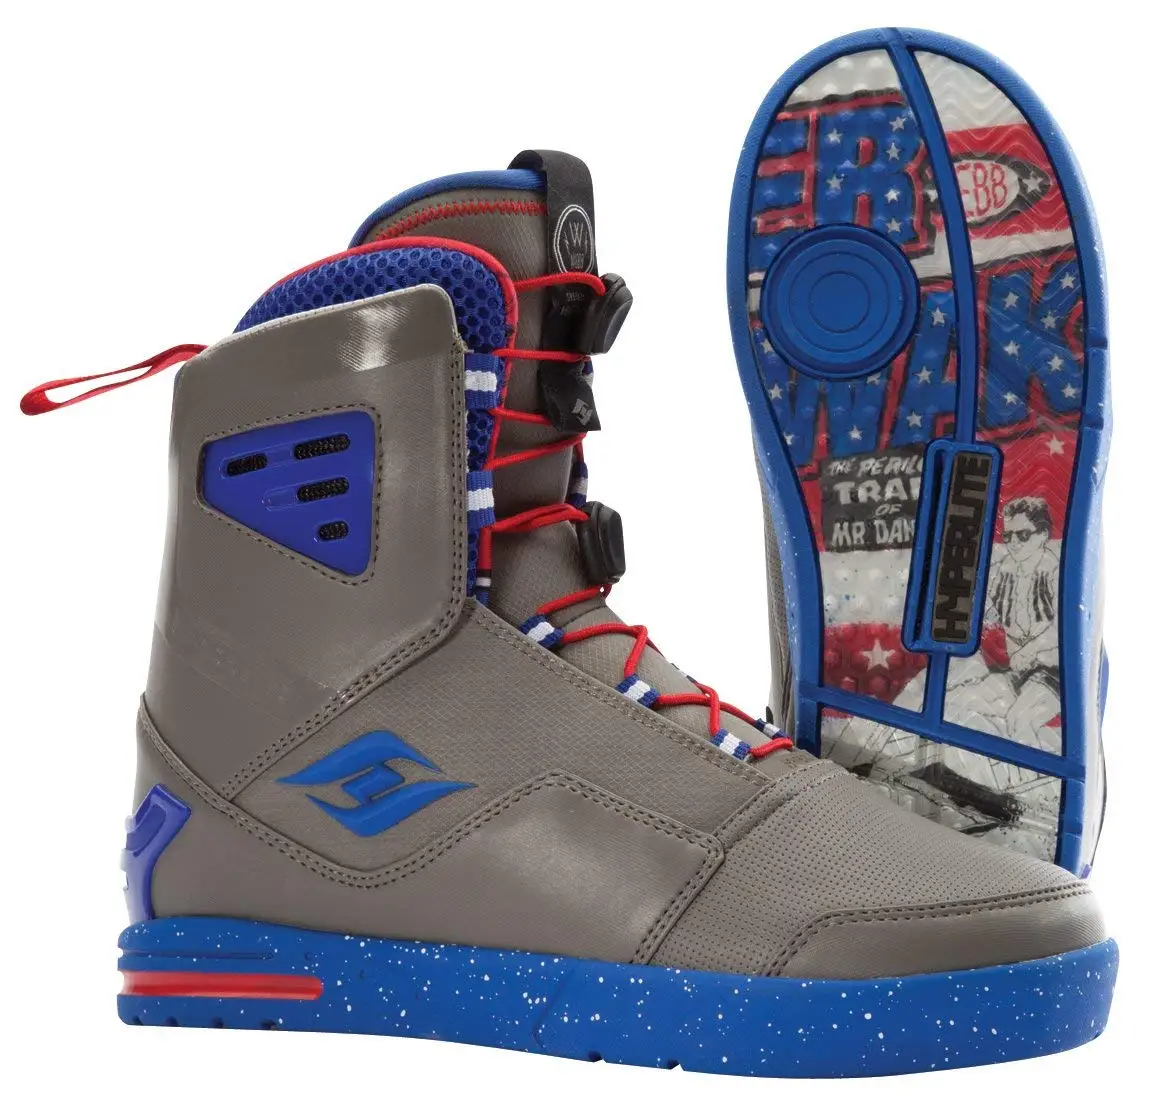 Wakeboard Boots Size Chart